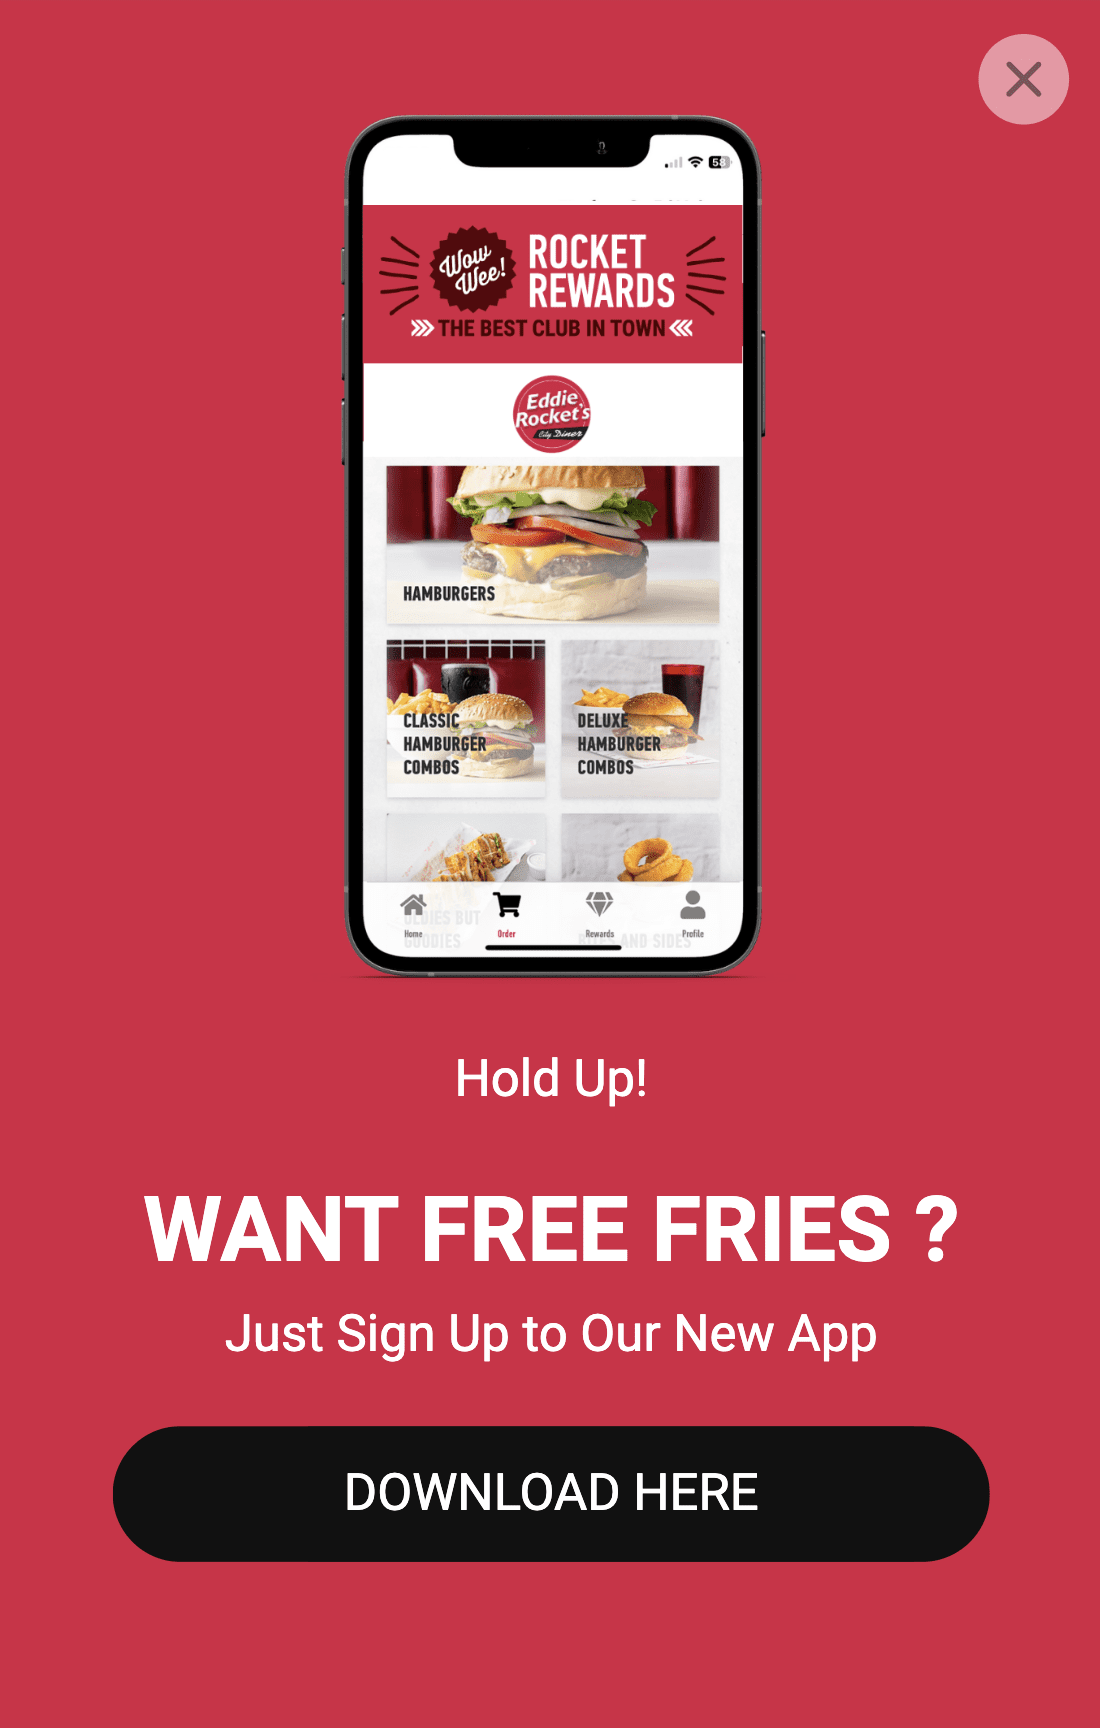 Pop-up banner image that links to the download page for the app